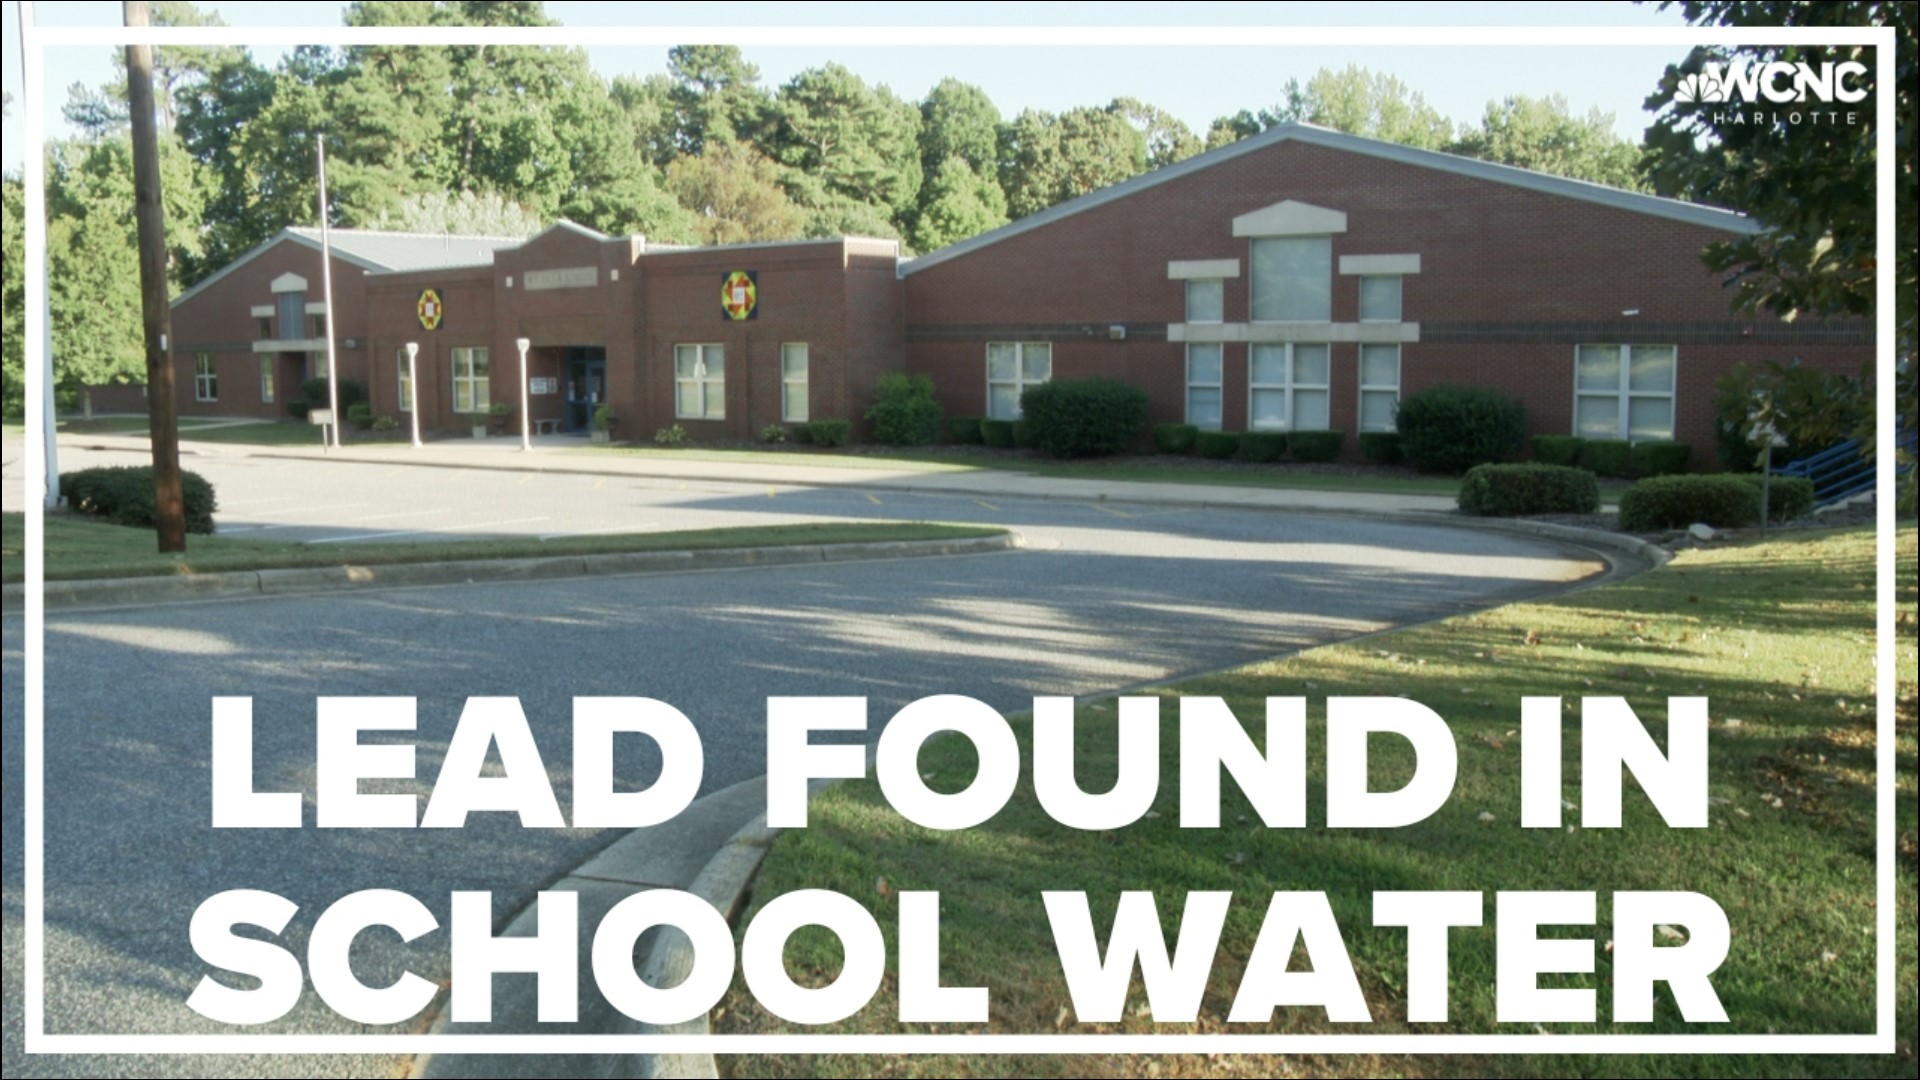 A regularly scheduled water test found elevated levels of lead in the water at a Rowan-Salisbury school last week.